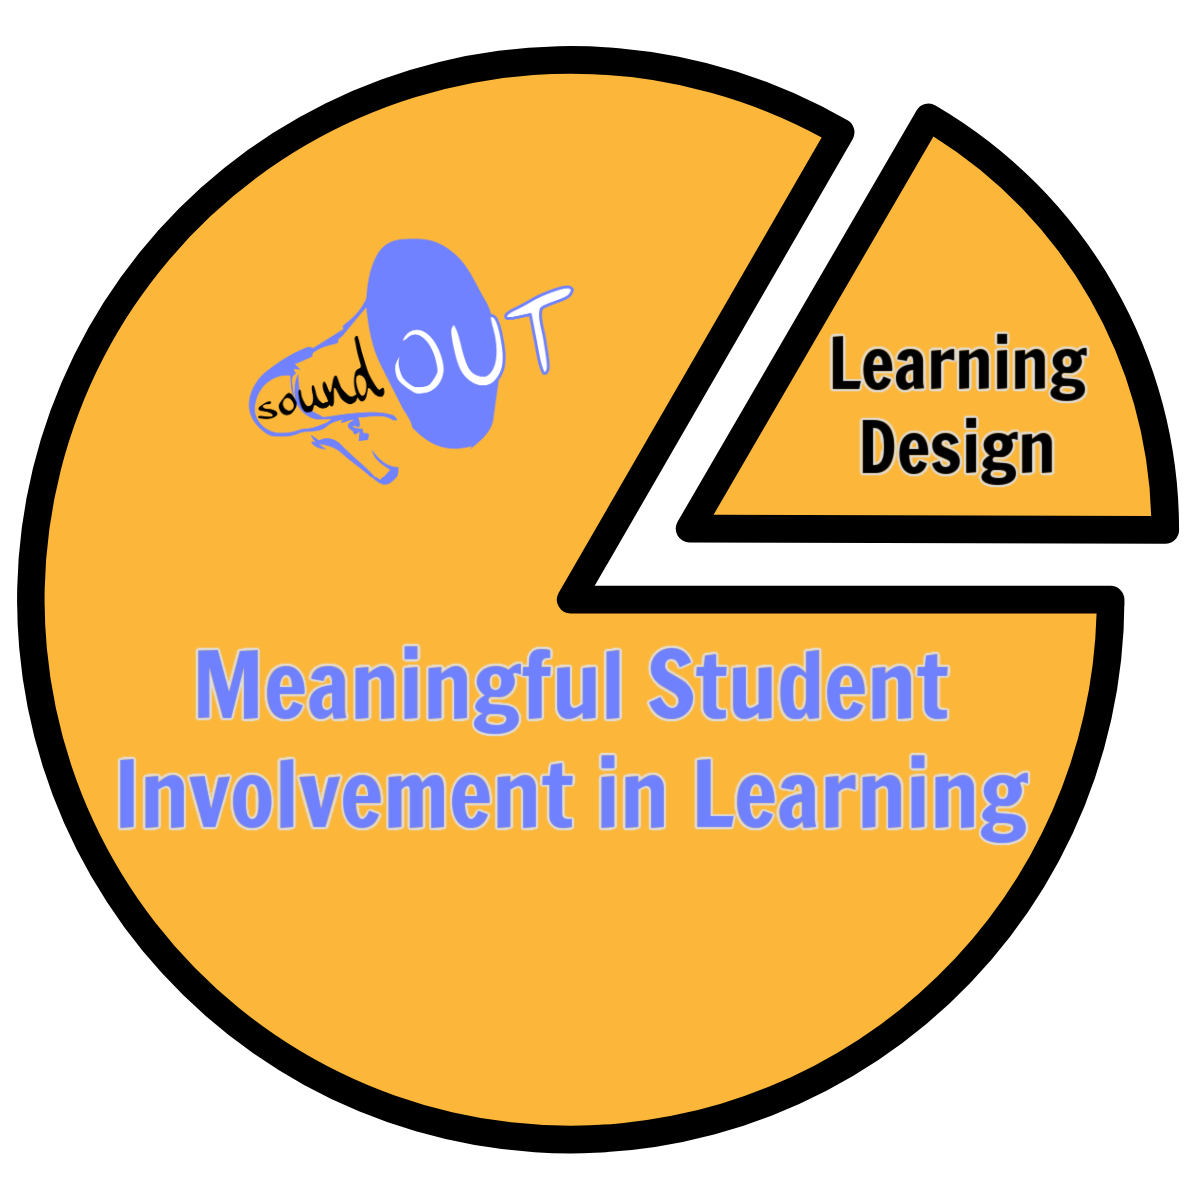 Ensuring that Meaningful Student Involvement in Learning happens requires engaging students as learning designers.